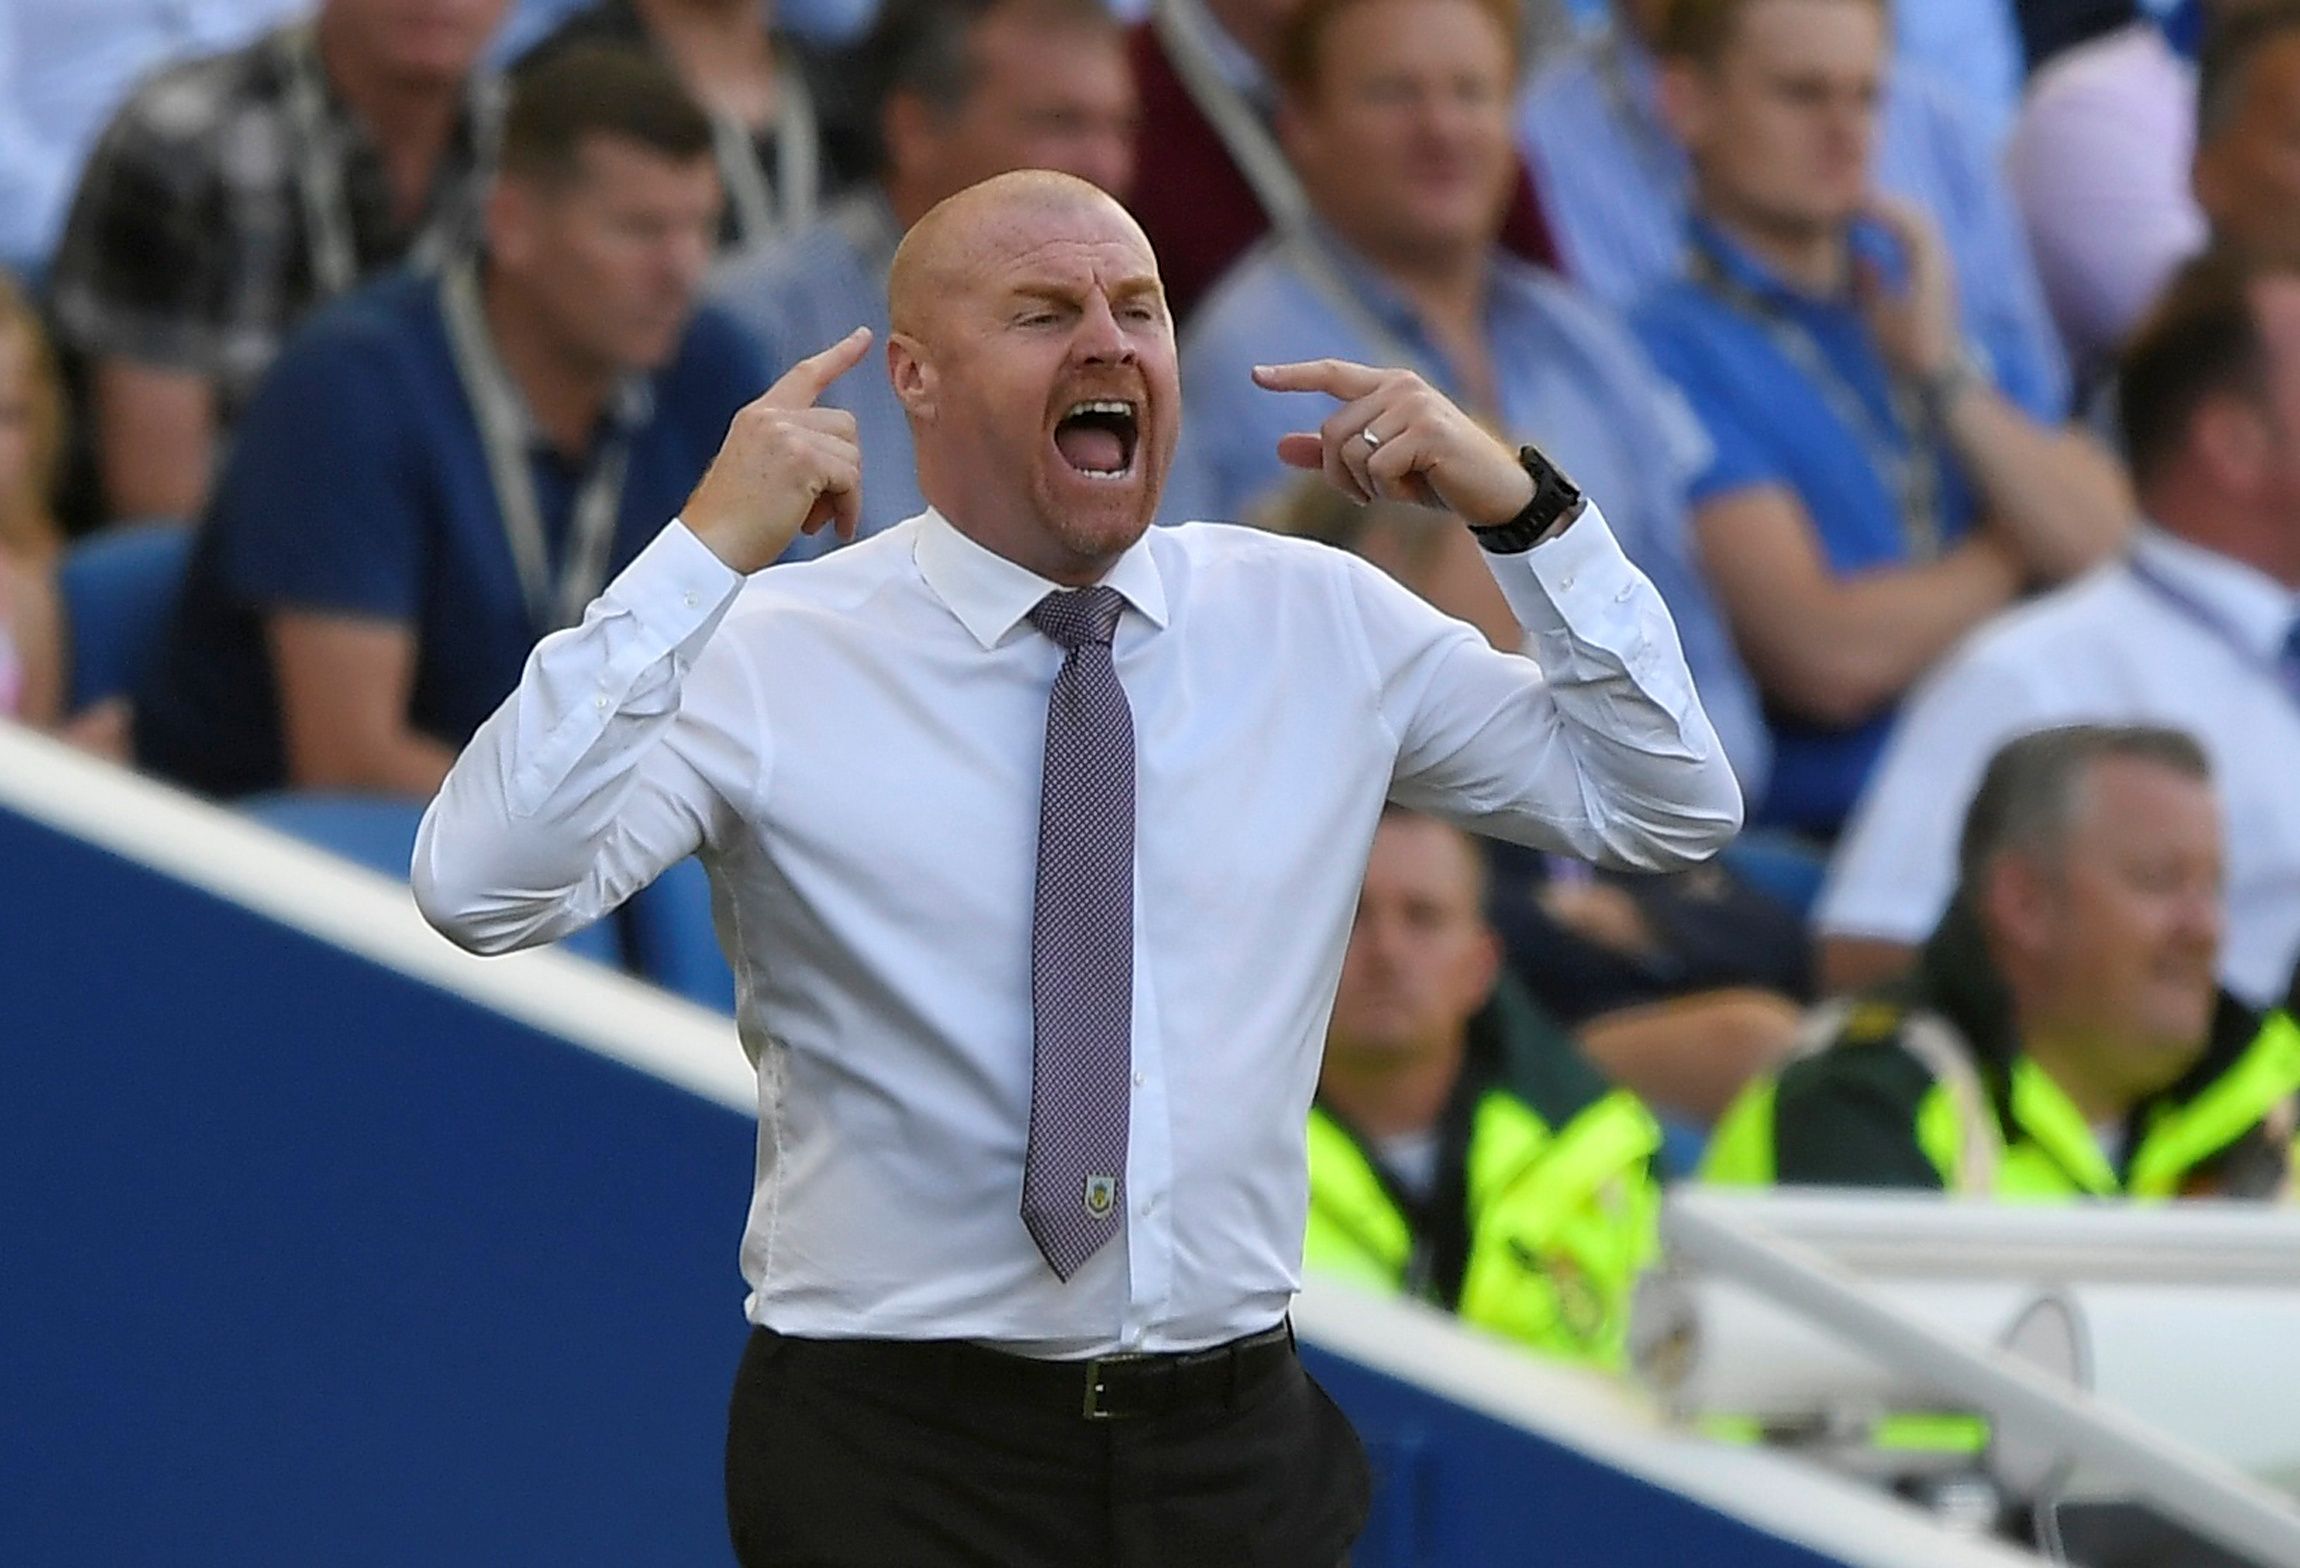 Soccer Football - Premier League - Brighton &amp; Hove Albion v Burnley - The American Express Community Stadium, Brighton, Britain - September 14, 2019  Burnley manager Sean Dyche gestures and reacts REUTERS/Toby Melville  EDITORIAL USE ONLY. No use with unauthorized audio, video, data, fixture lists, club/league logos or 